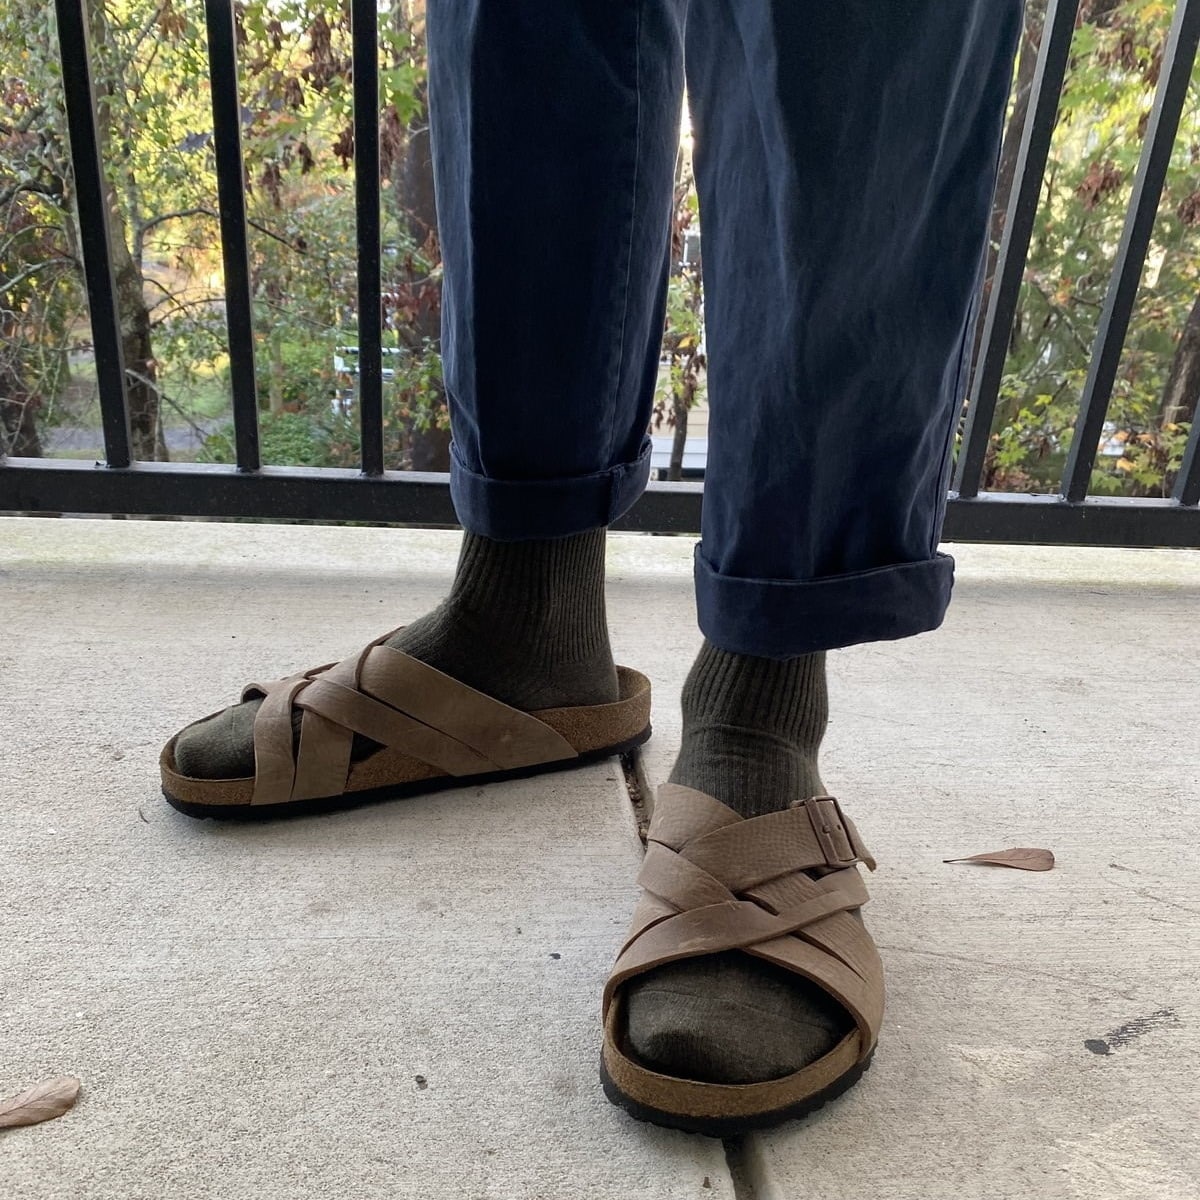 How to wear socks with sandals: Birkenstock, Teva, Chaco, and more -  Reviewed